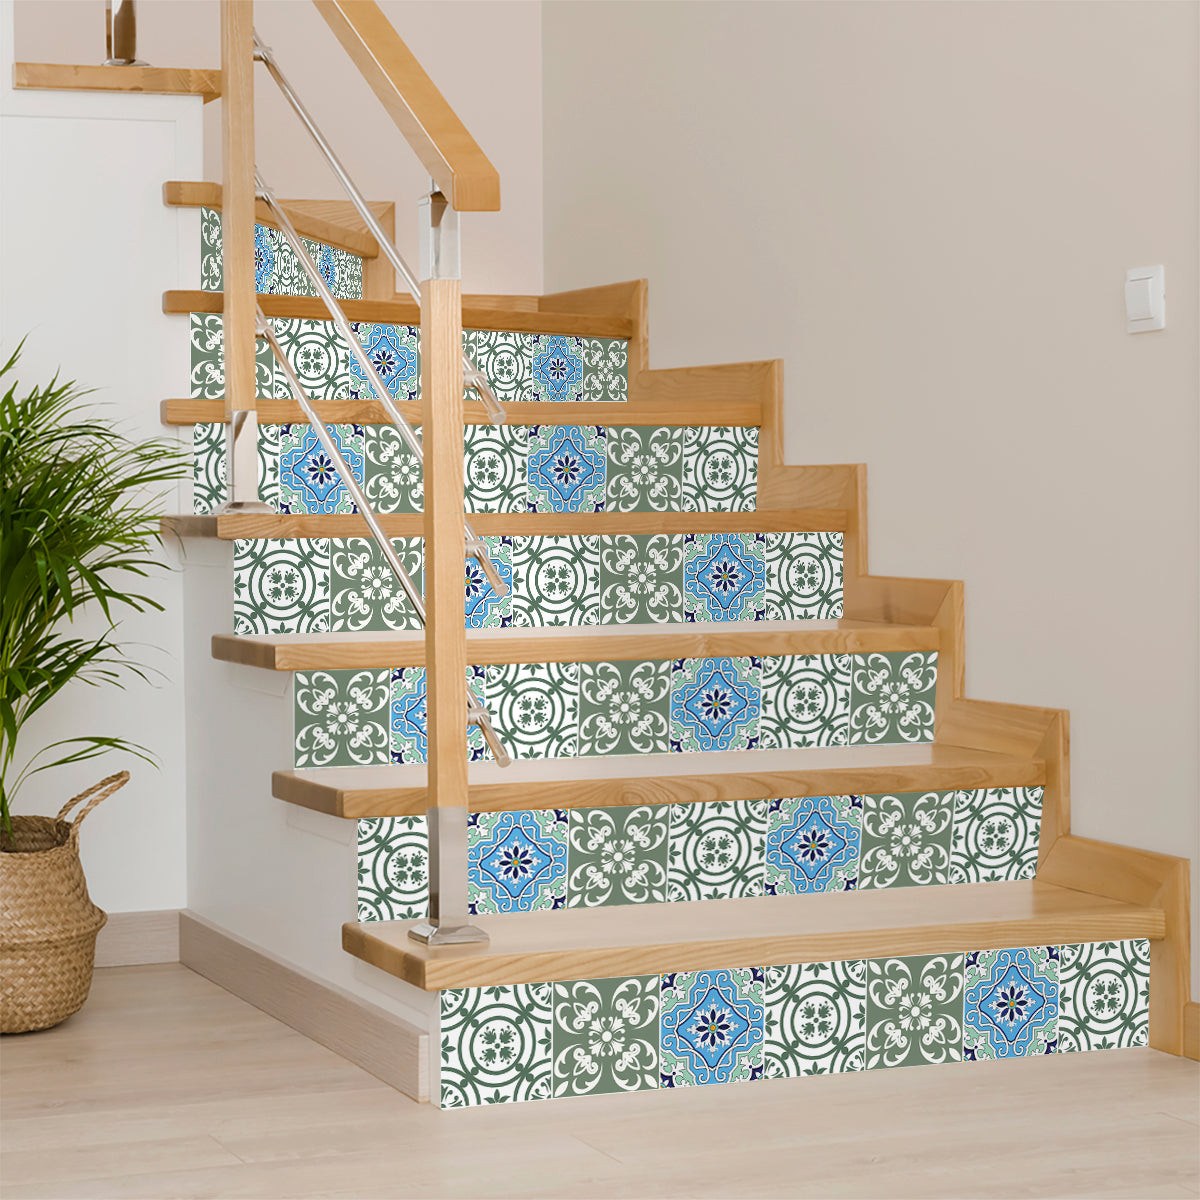 8" X 8" Sage And Aqua Floral Peel And Stick Removable Tiles-390887-1